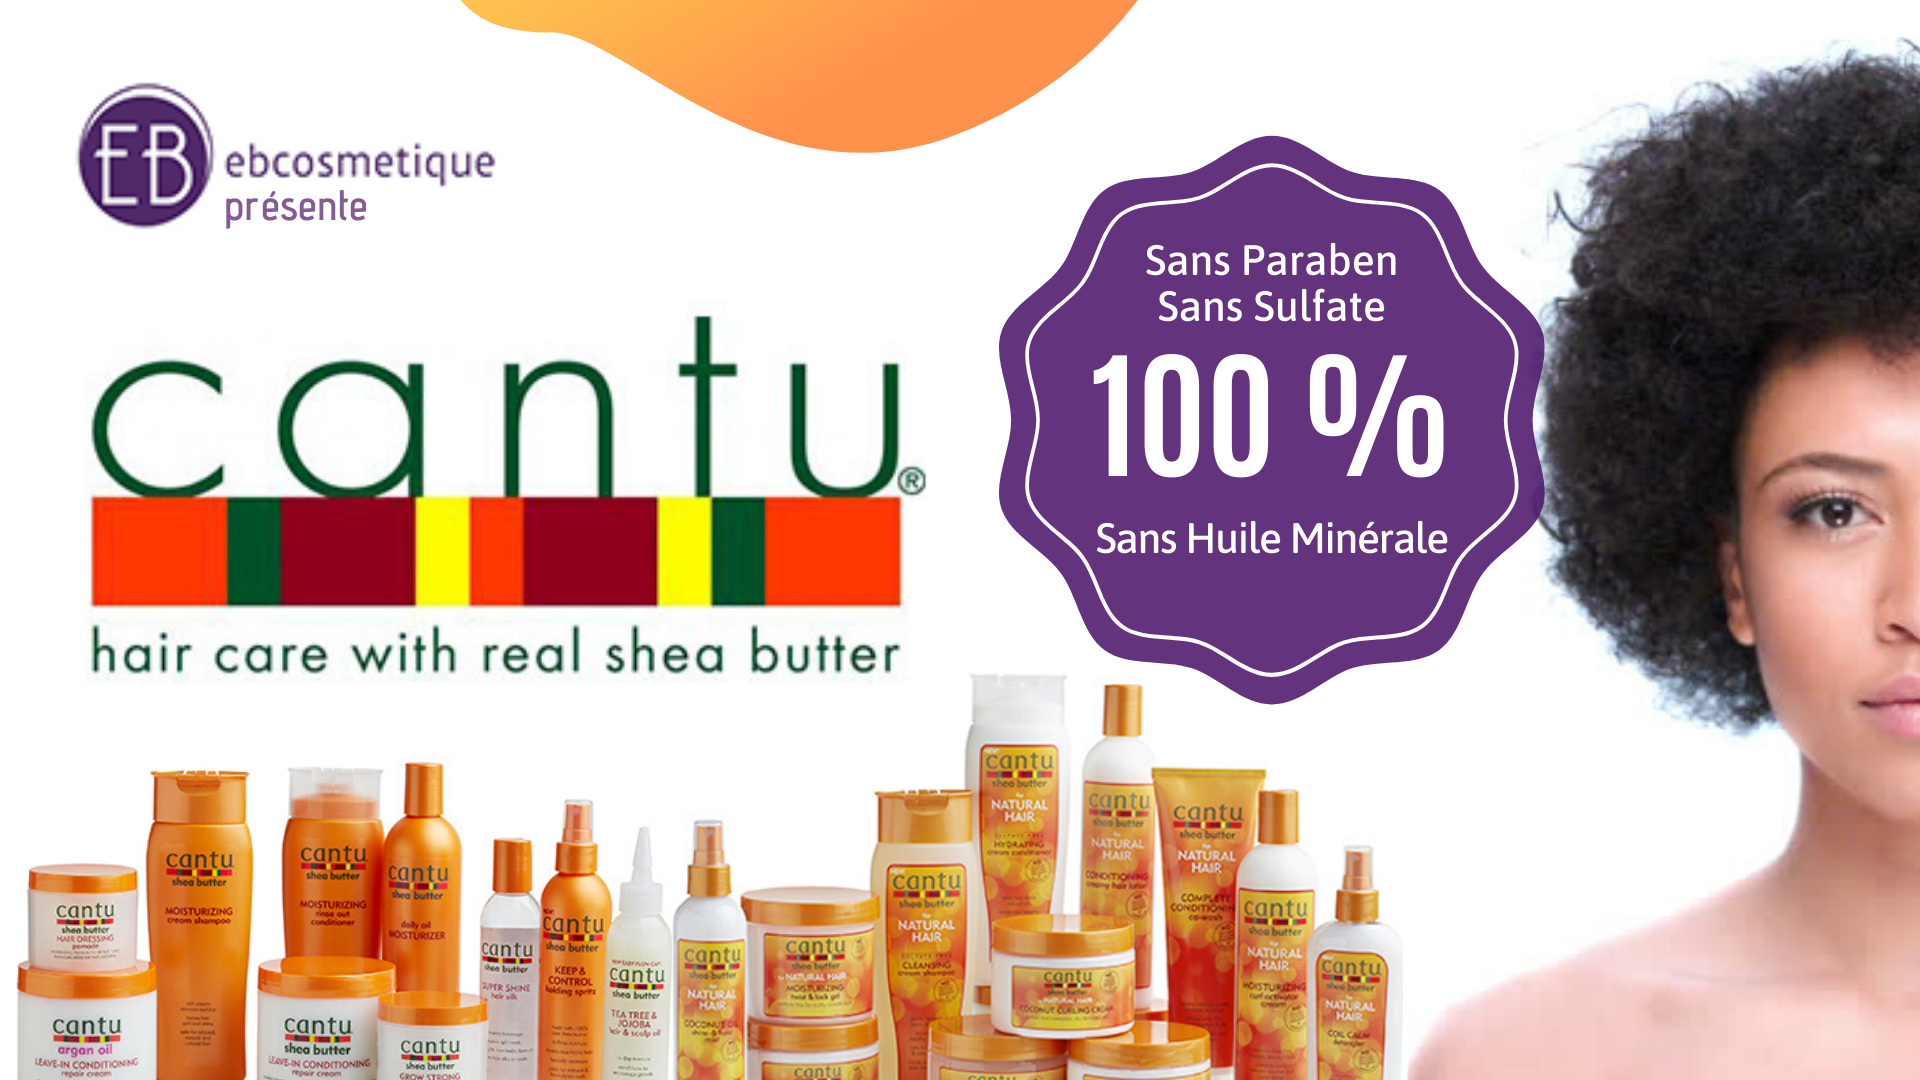 fiche produit ebcosmetique cantu shea butter natural hair conditioning creamy hair lotion